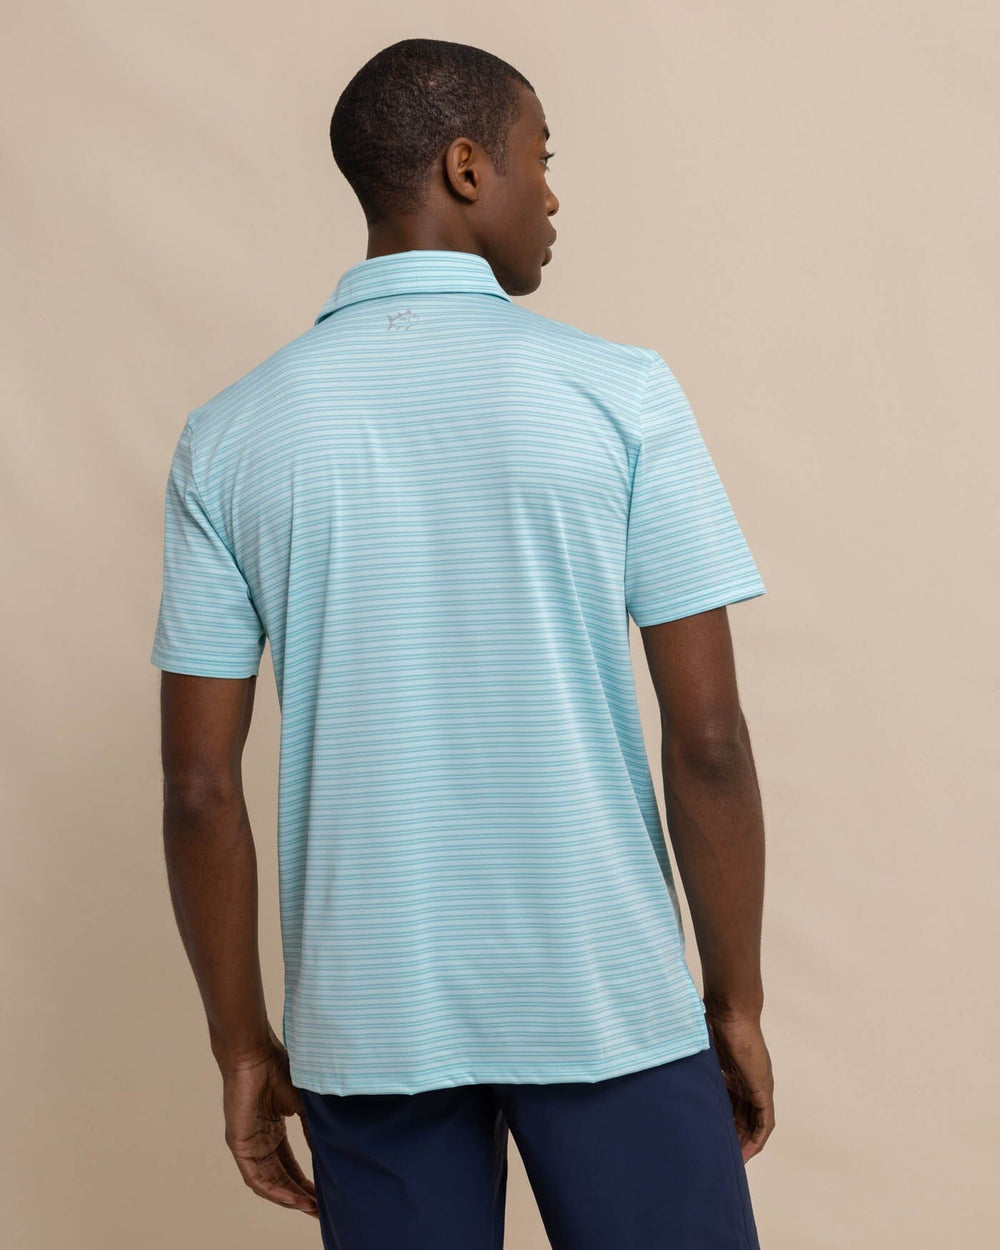 The back view of the Southern Tide Driver Baywoods Stripe Polo by Southern Tide - Wake Blue